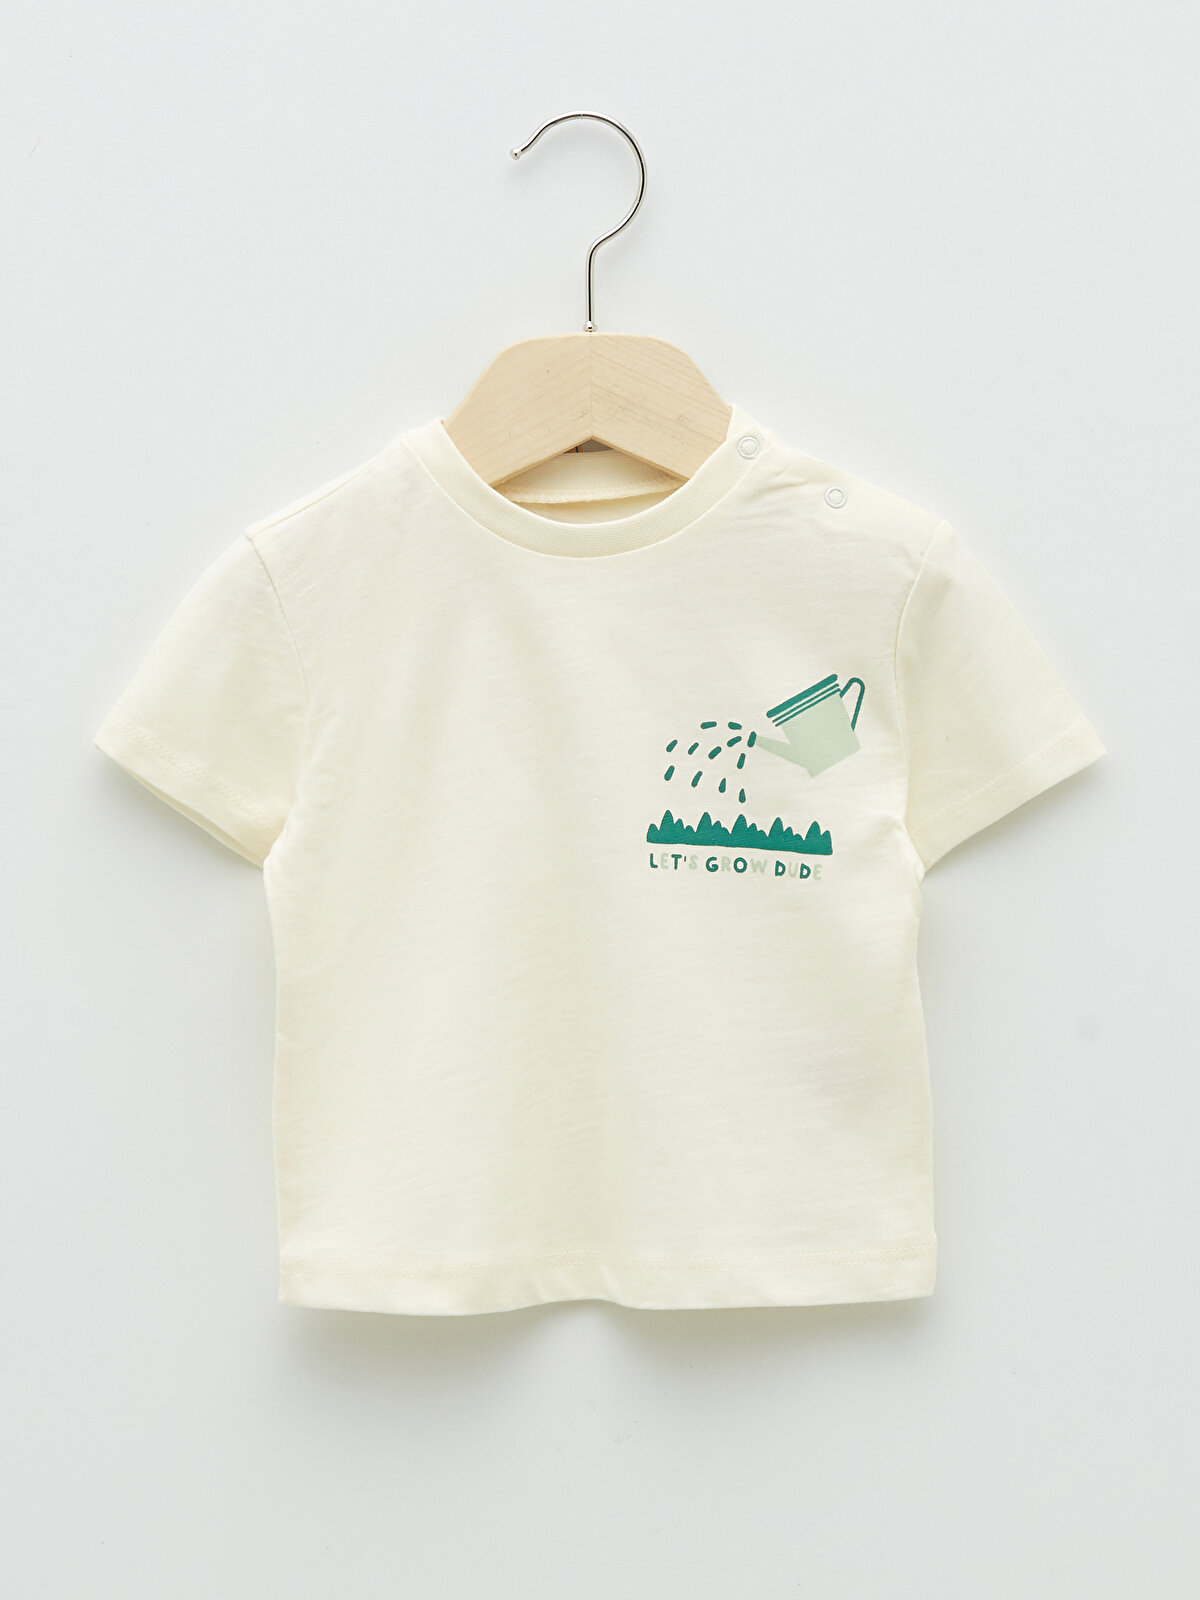 Crew Neck Short Sleeve Printed Baby Boy T-Shirt and Trousers 2 